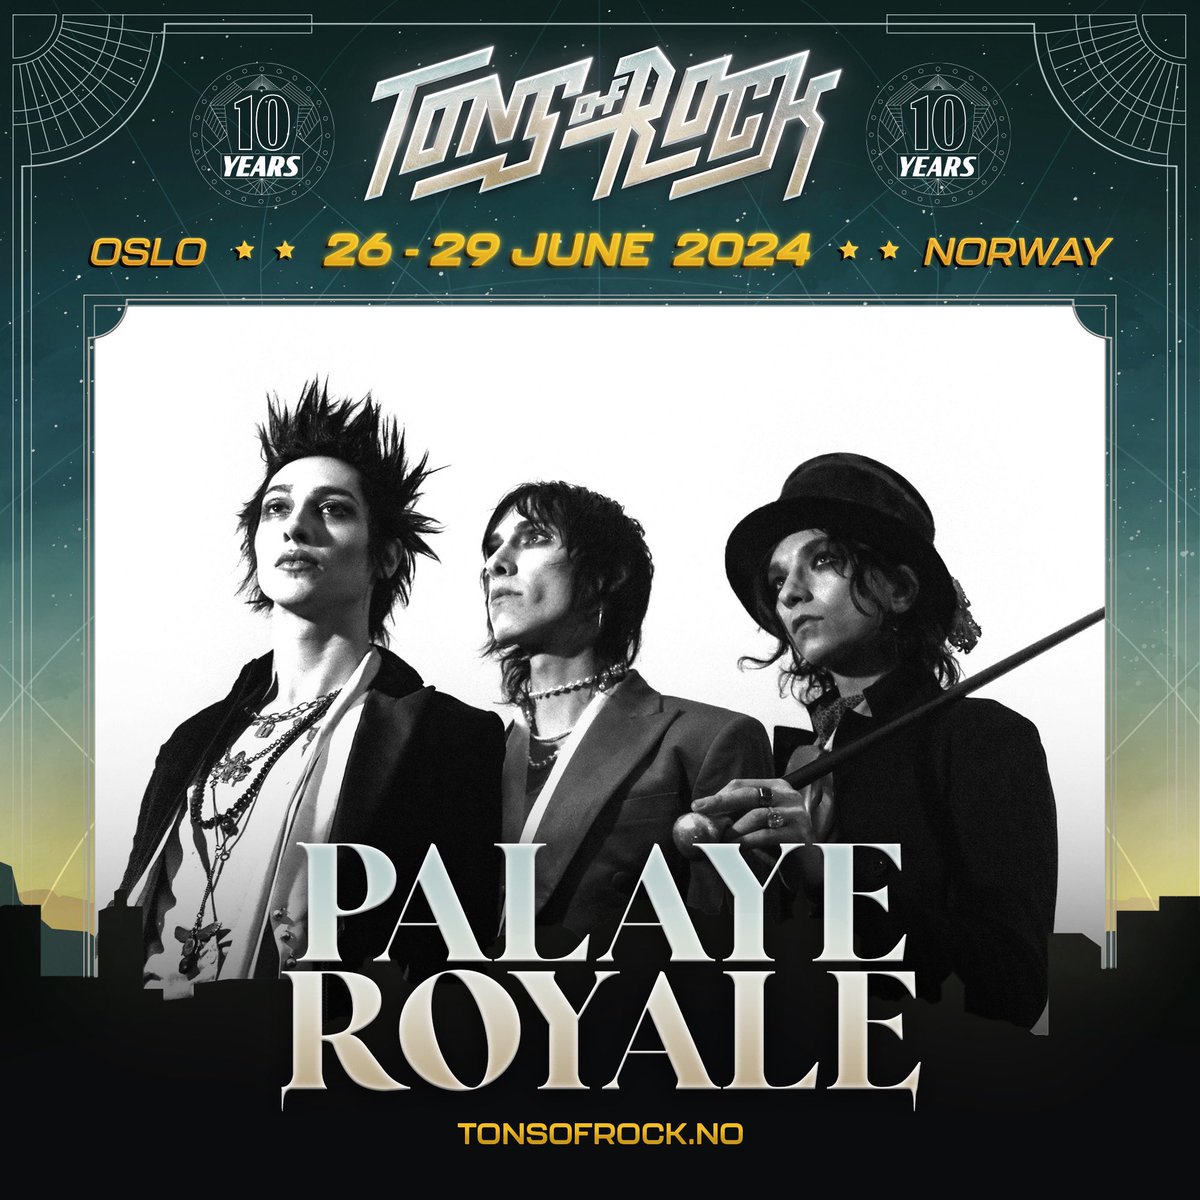 Norway! We will see you in June. 🇳🇴 
@tonsofrock